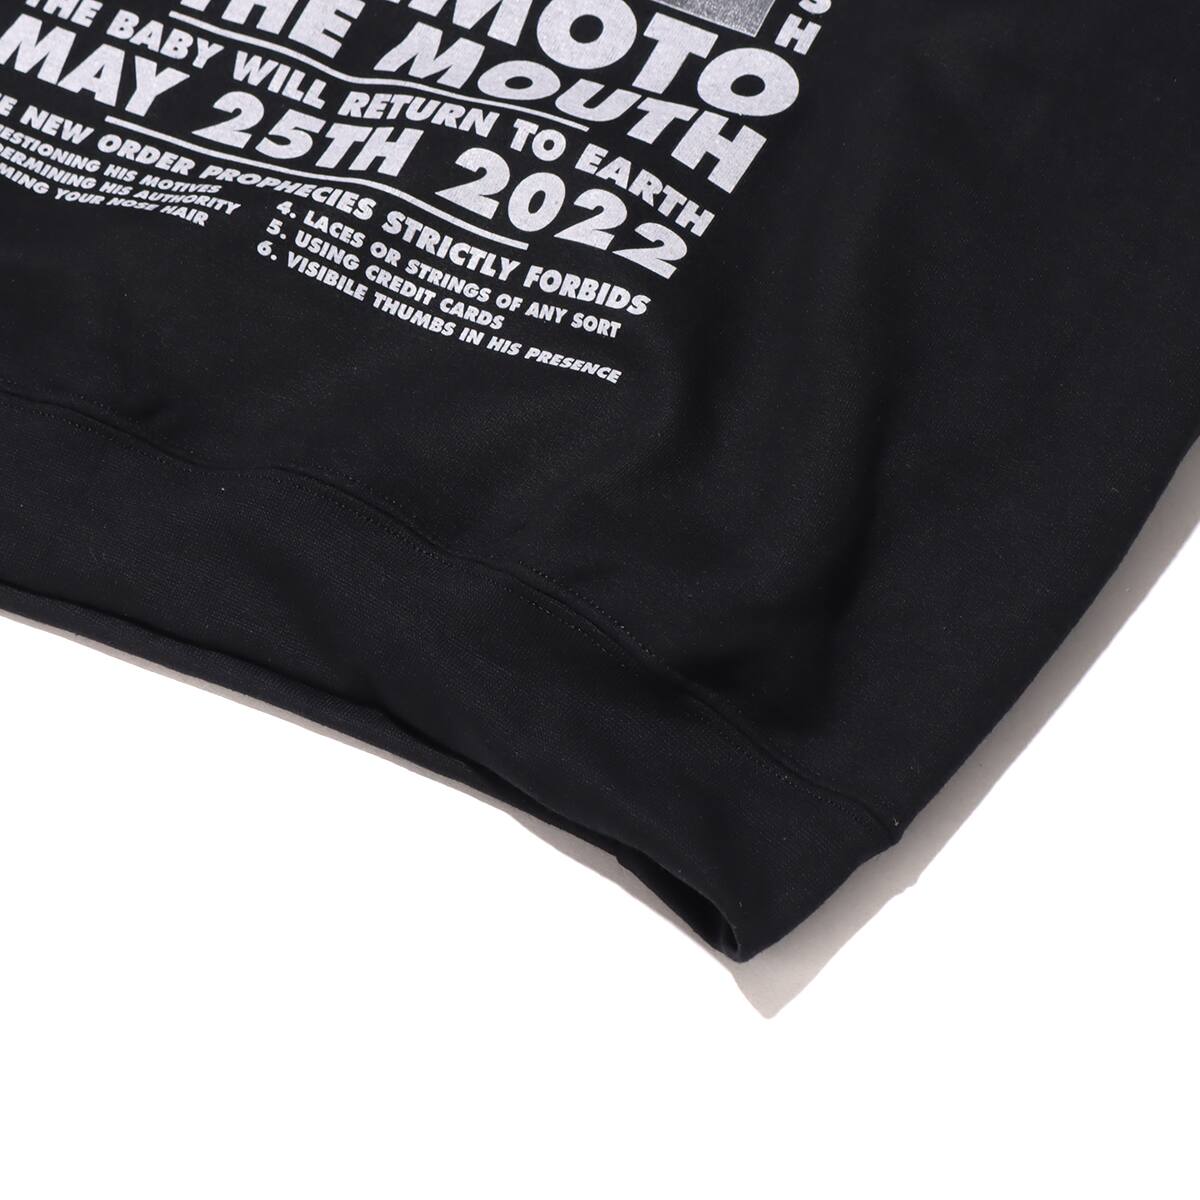 THE NEW ORDER NISHIMOTO IS THE MOUTH CREW NECK BLACK 21SP-I